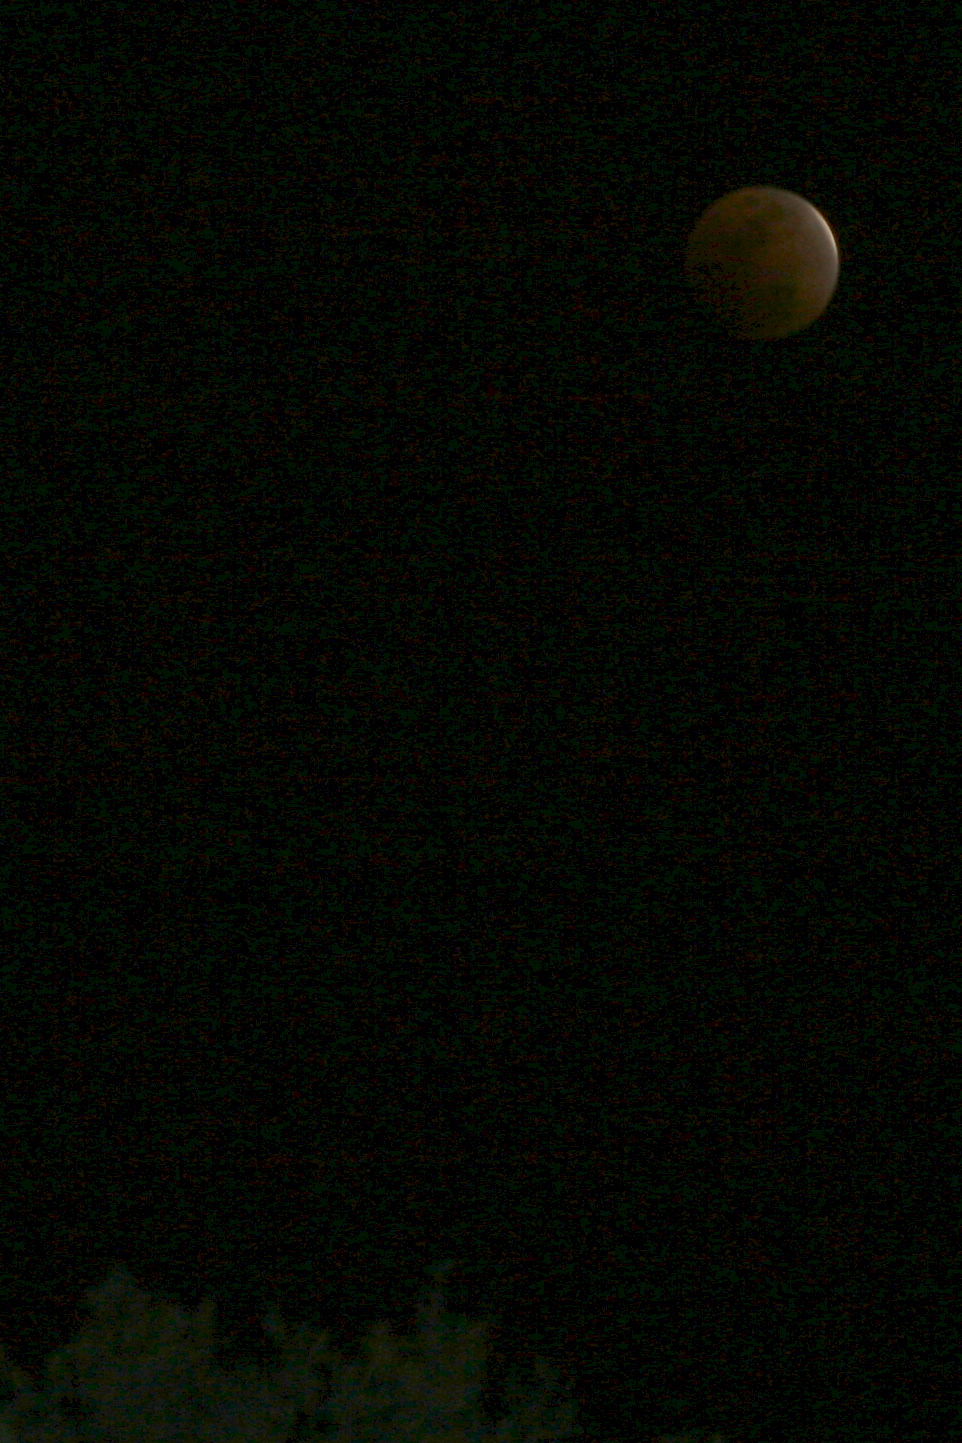 [total+eclipse+of+the+moon.JPG]